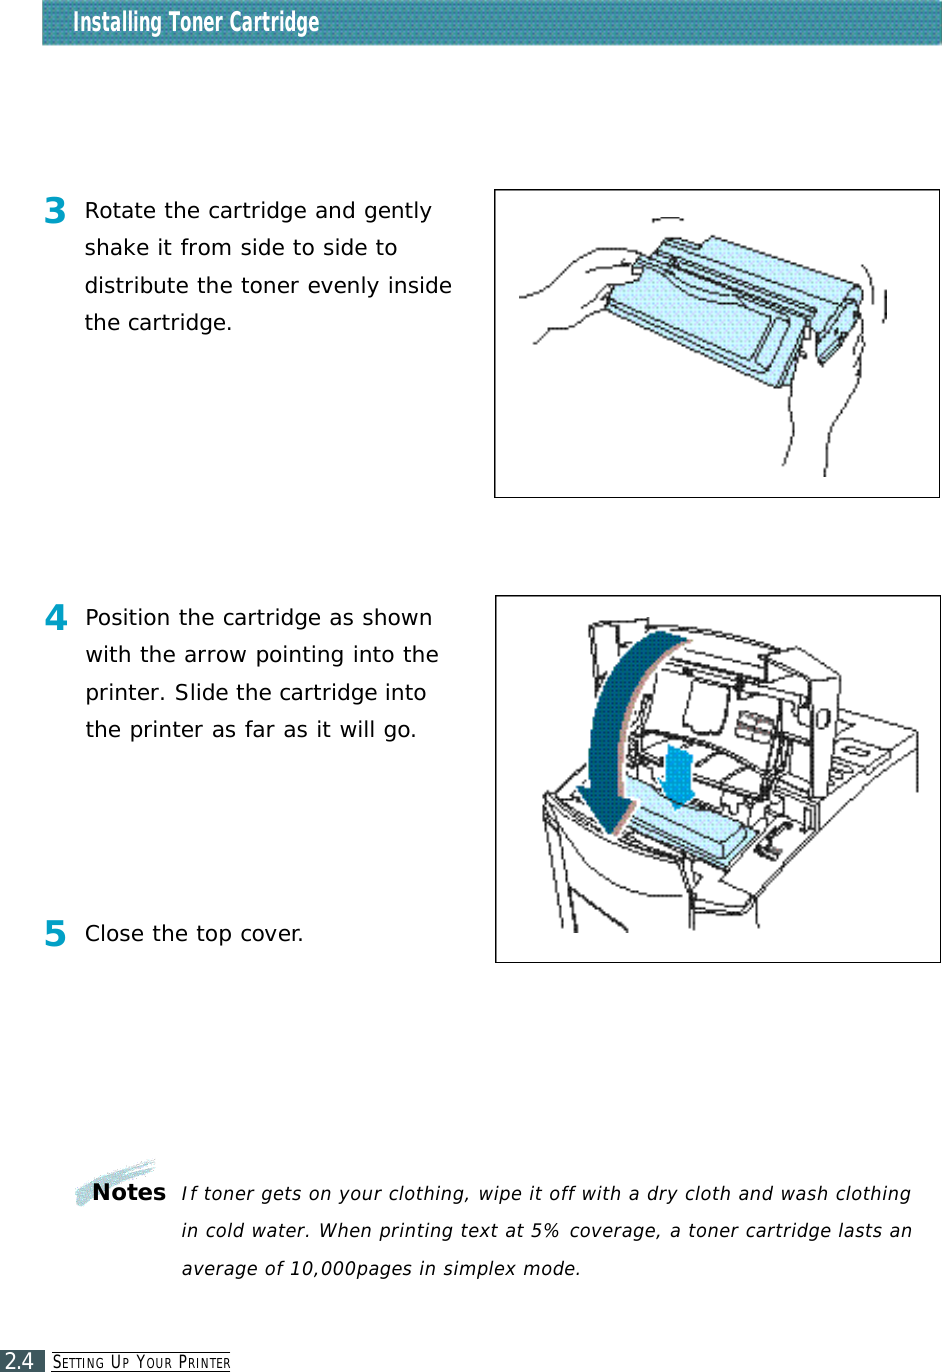 SE T T I N G UPYO U R PR I N T E R2.4Installing Toner Cartridge3Rotate the cartridge and gentlyshake it from side to side to distribute the toner evenly insidethe cartridge.4Position the cartridge as shownwith the arrow pointing into theprinter. Slide the cartridge intothe printer as far as it will go.NotesIf toner gets on your clothing, wipe it off with a dry cloth and wash clothingin cold water. When printing text at 5% coverage, a toner cartridge lasts anaverage of 10,000pages in simplex mode.5Close the top cover.